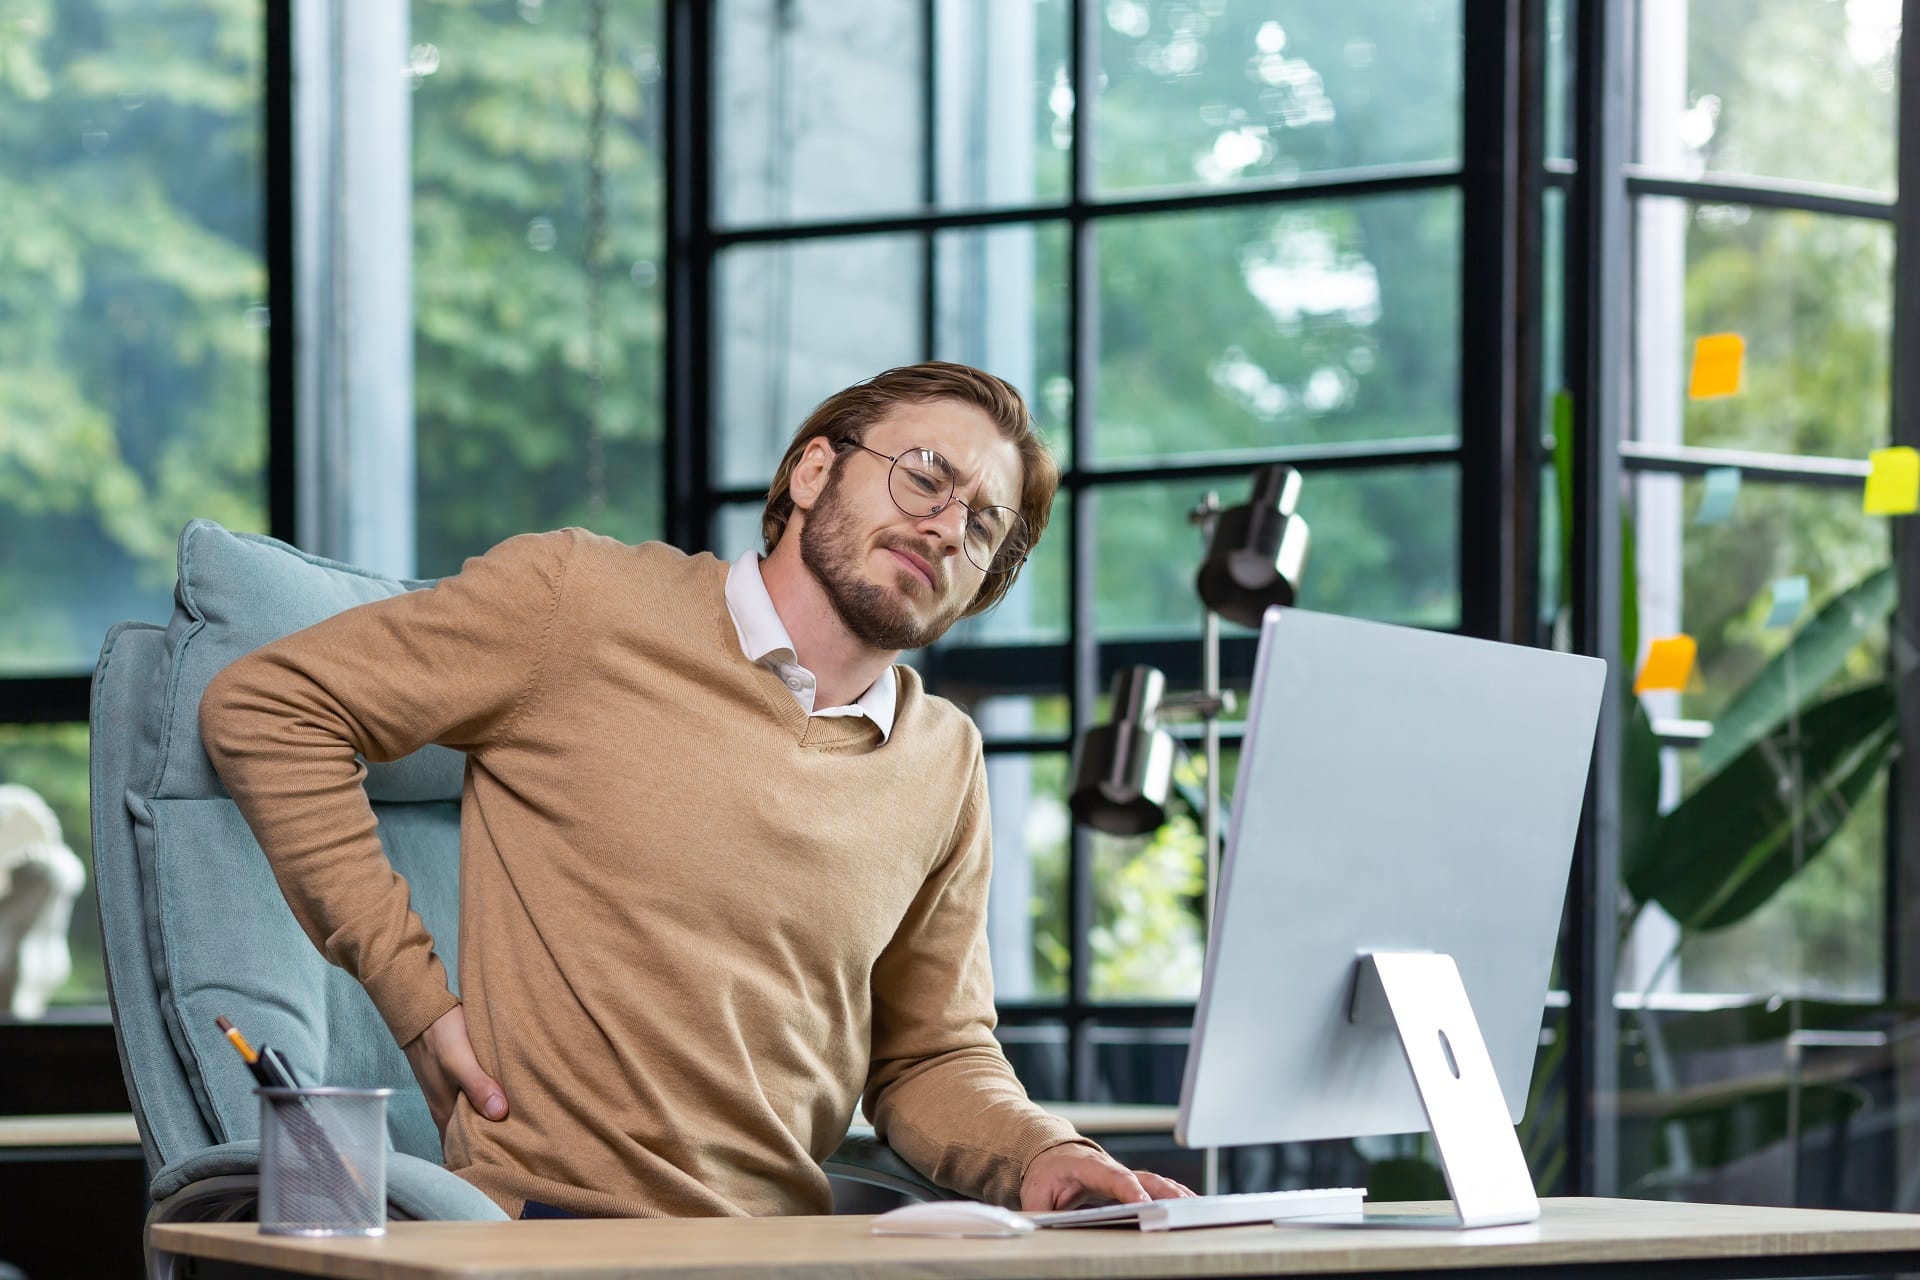 how to prevent lower back pain while at work